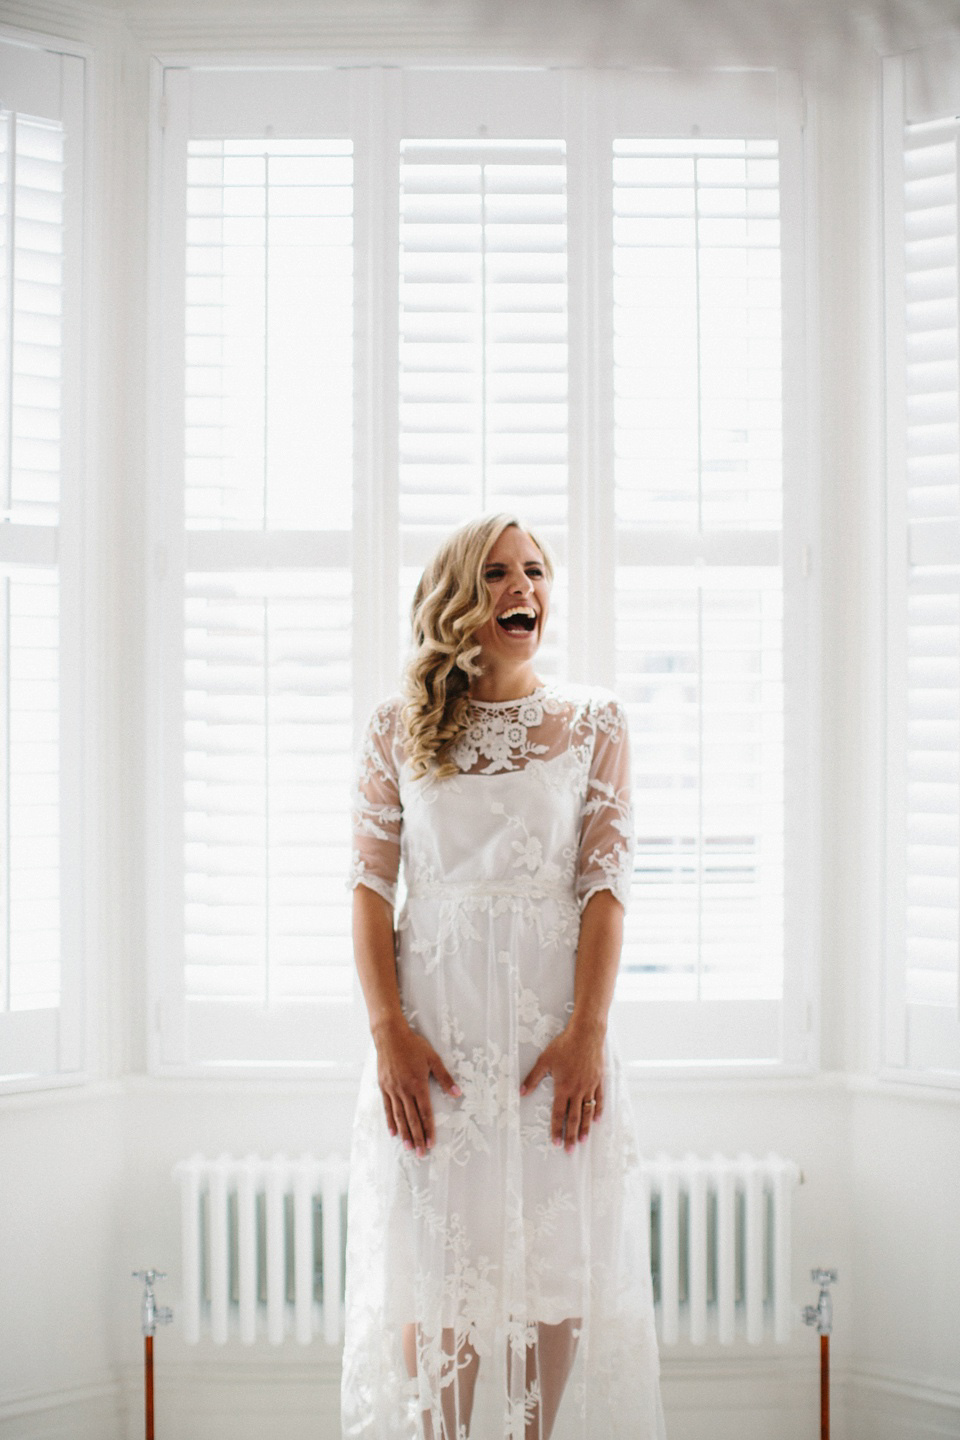 A Vintage Gown by Days of Grace for a Stylish Low-Key and Relaxed London Pub Wedding. Photography by Peach & Jo.